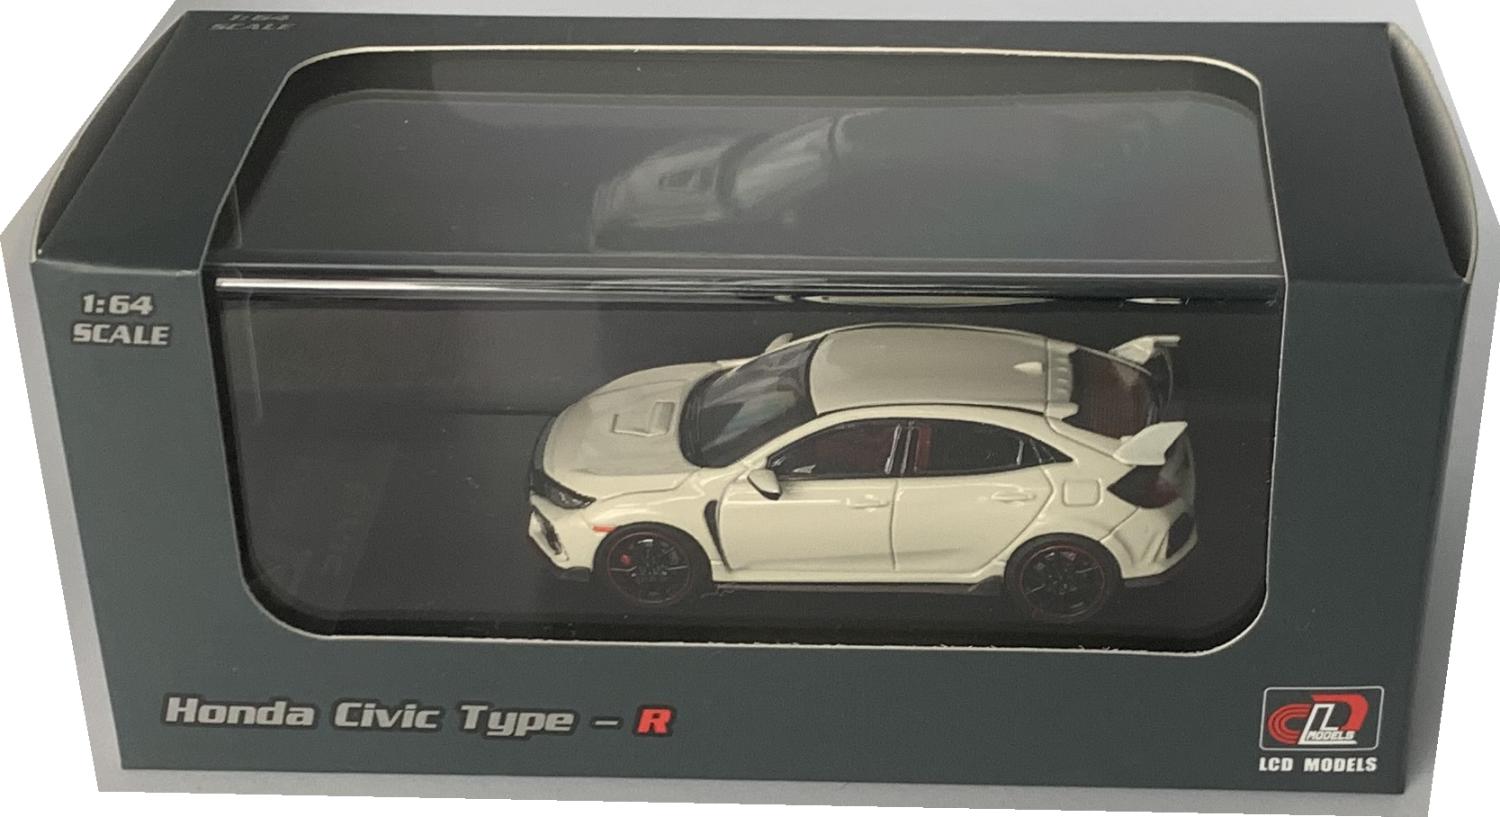 Honda Civic Type R in white 1:64 scale model from LCD models